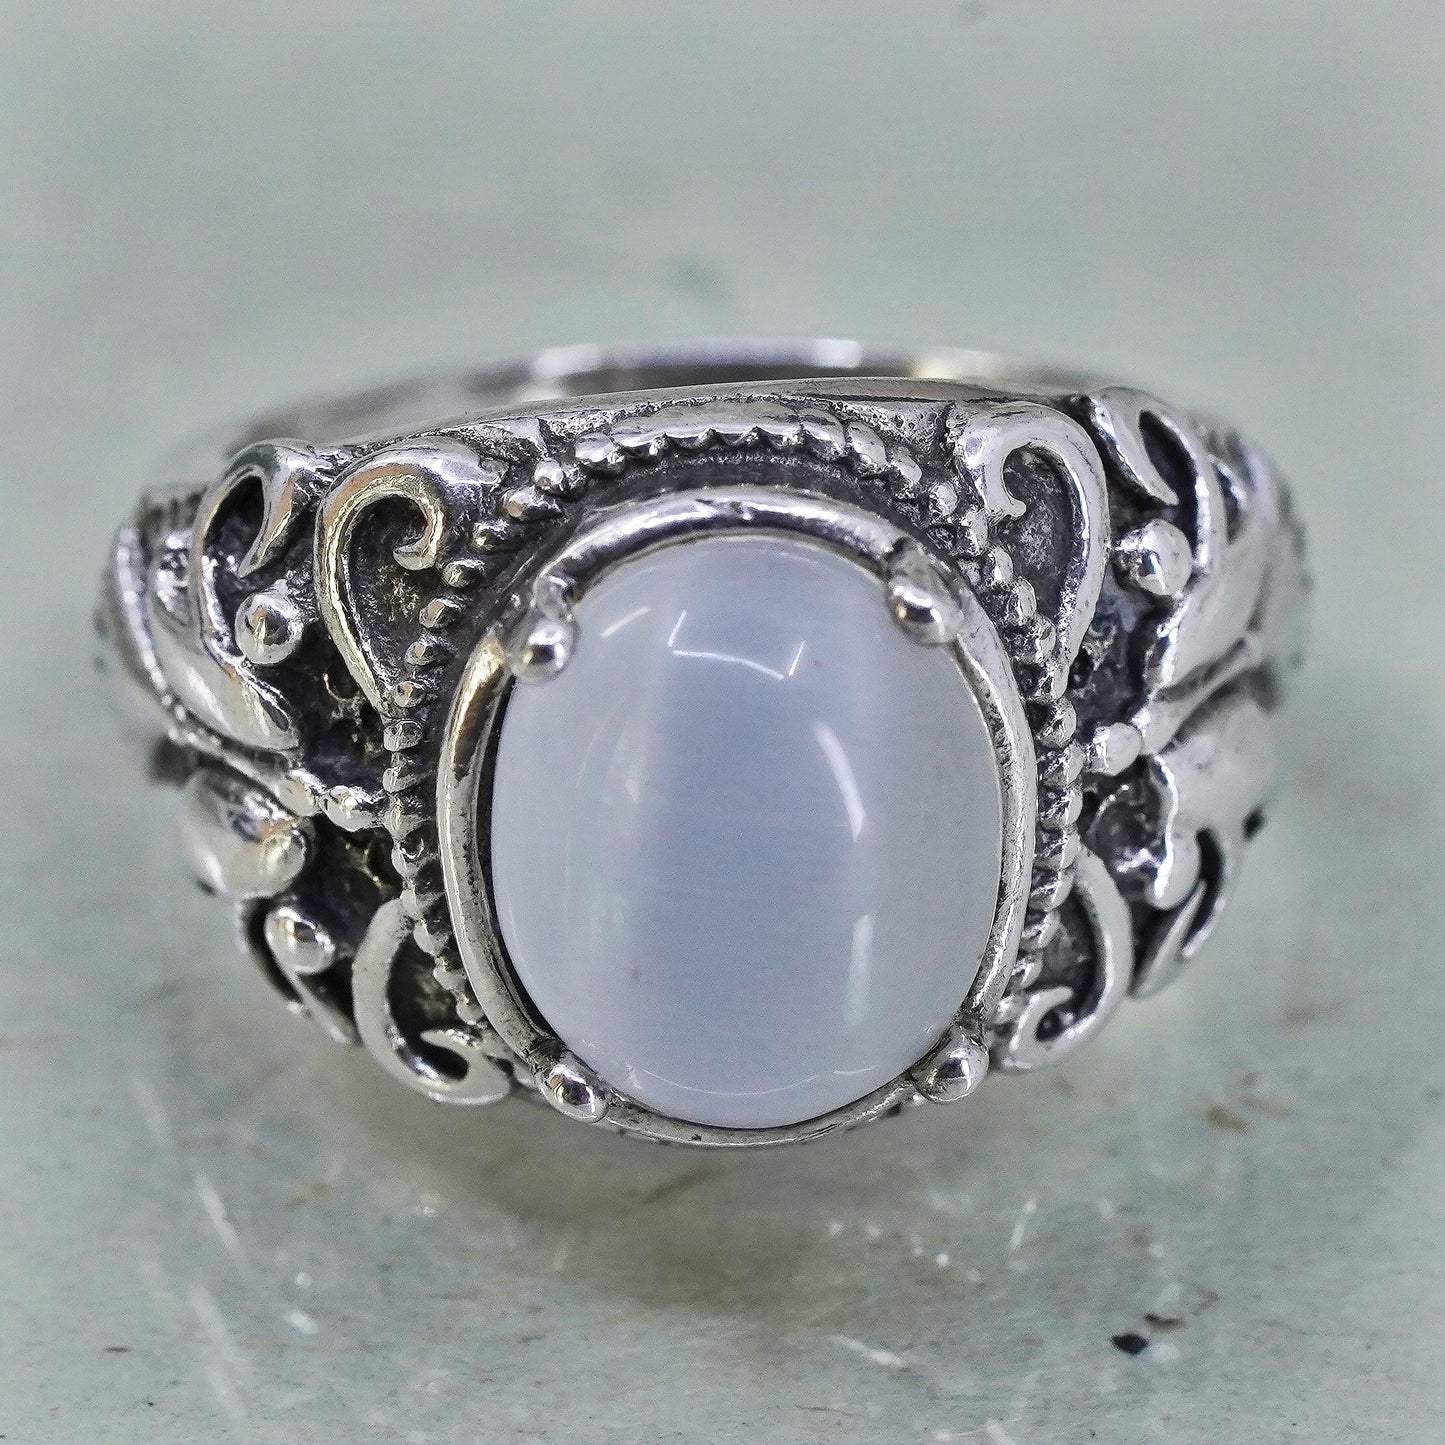 Size 9, Vintage sterling 925 silver ring handmade with oval white cats eye